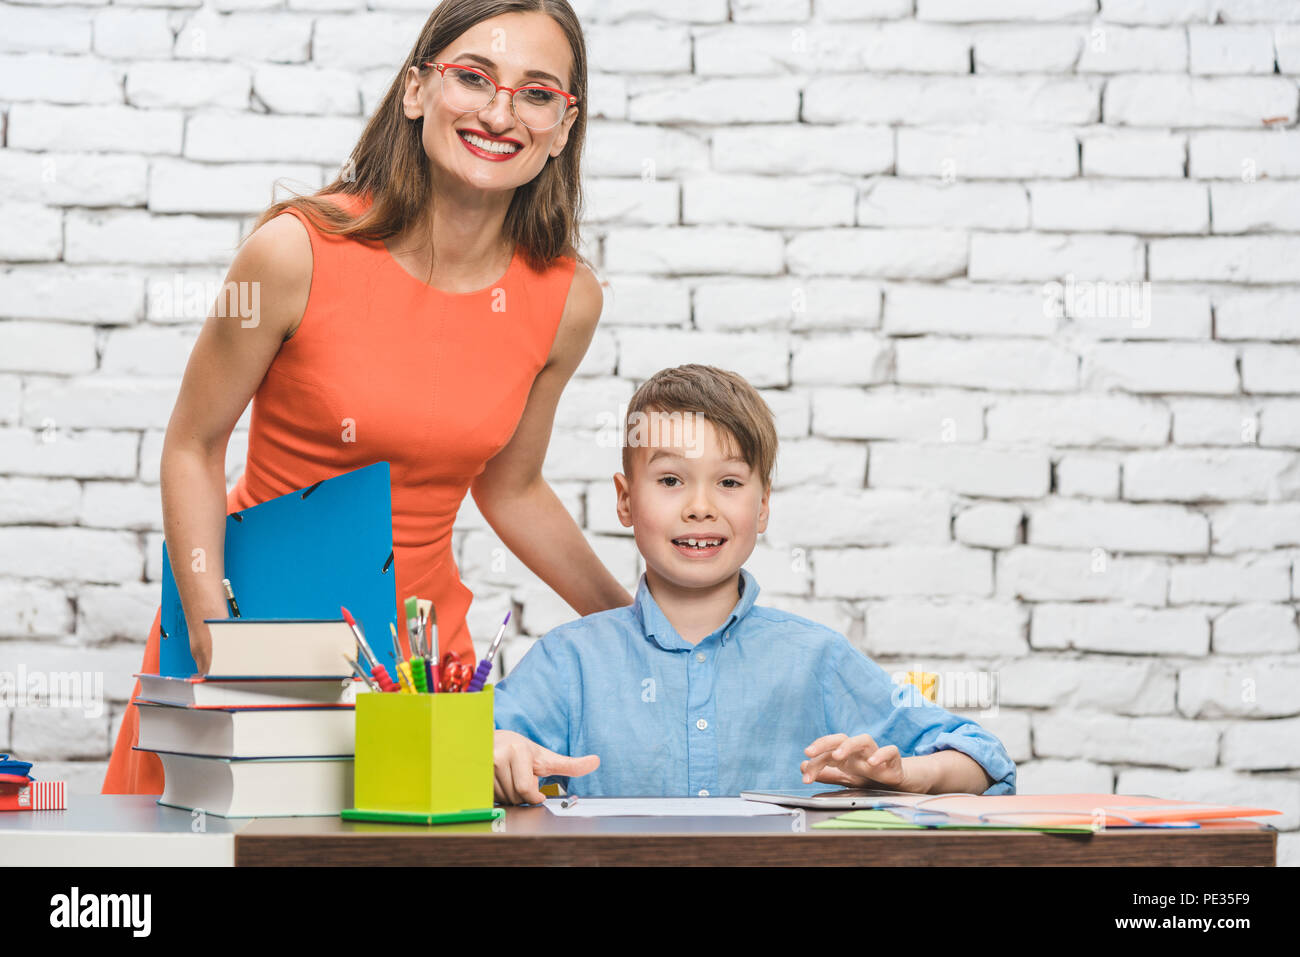 Teacher and school student looking at the camera Stock Photo